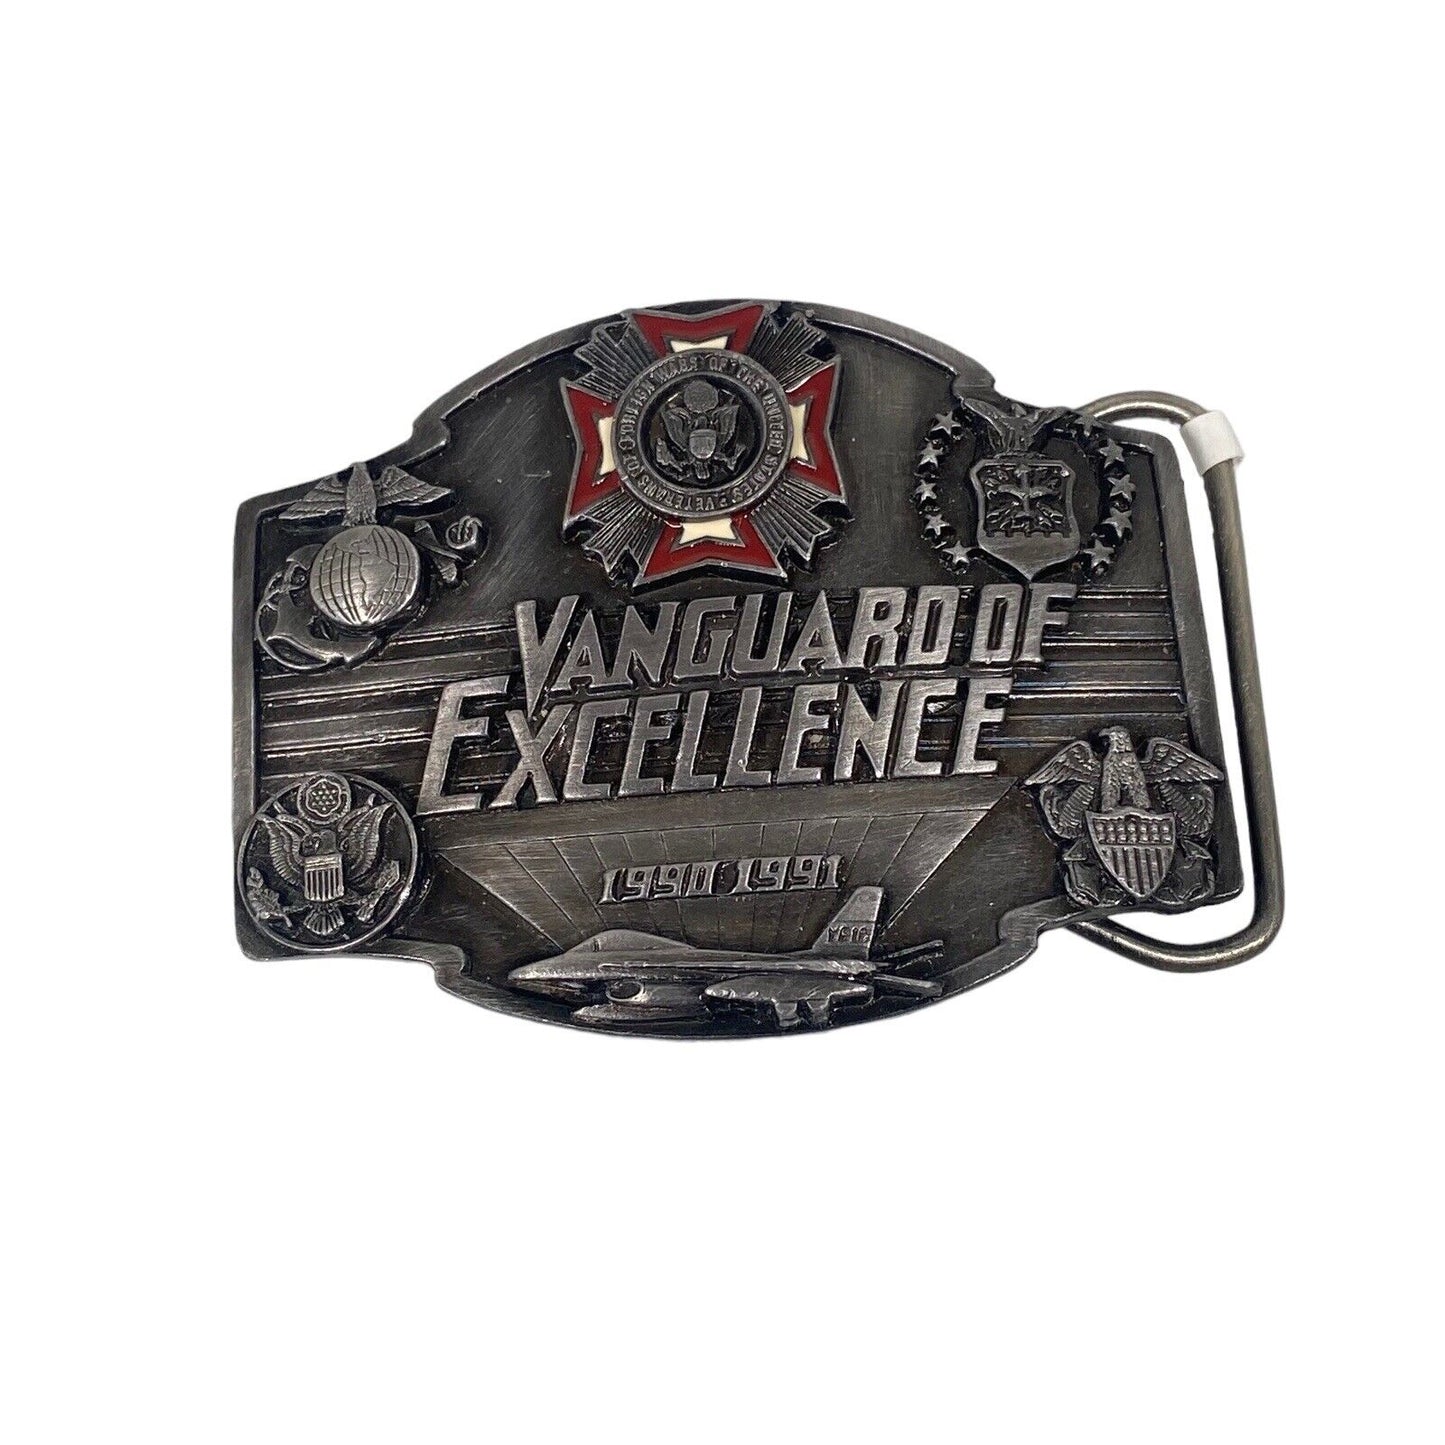 1990 VFW VANGUARD OF EXCELLENCE Pewter Belt Buckle Military Limited Edition